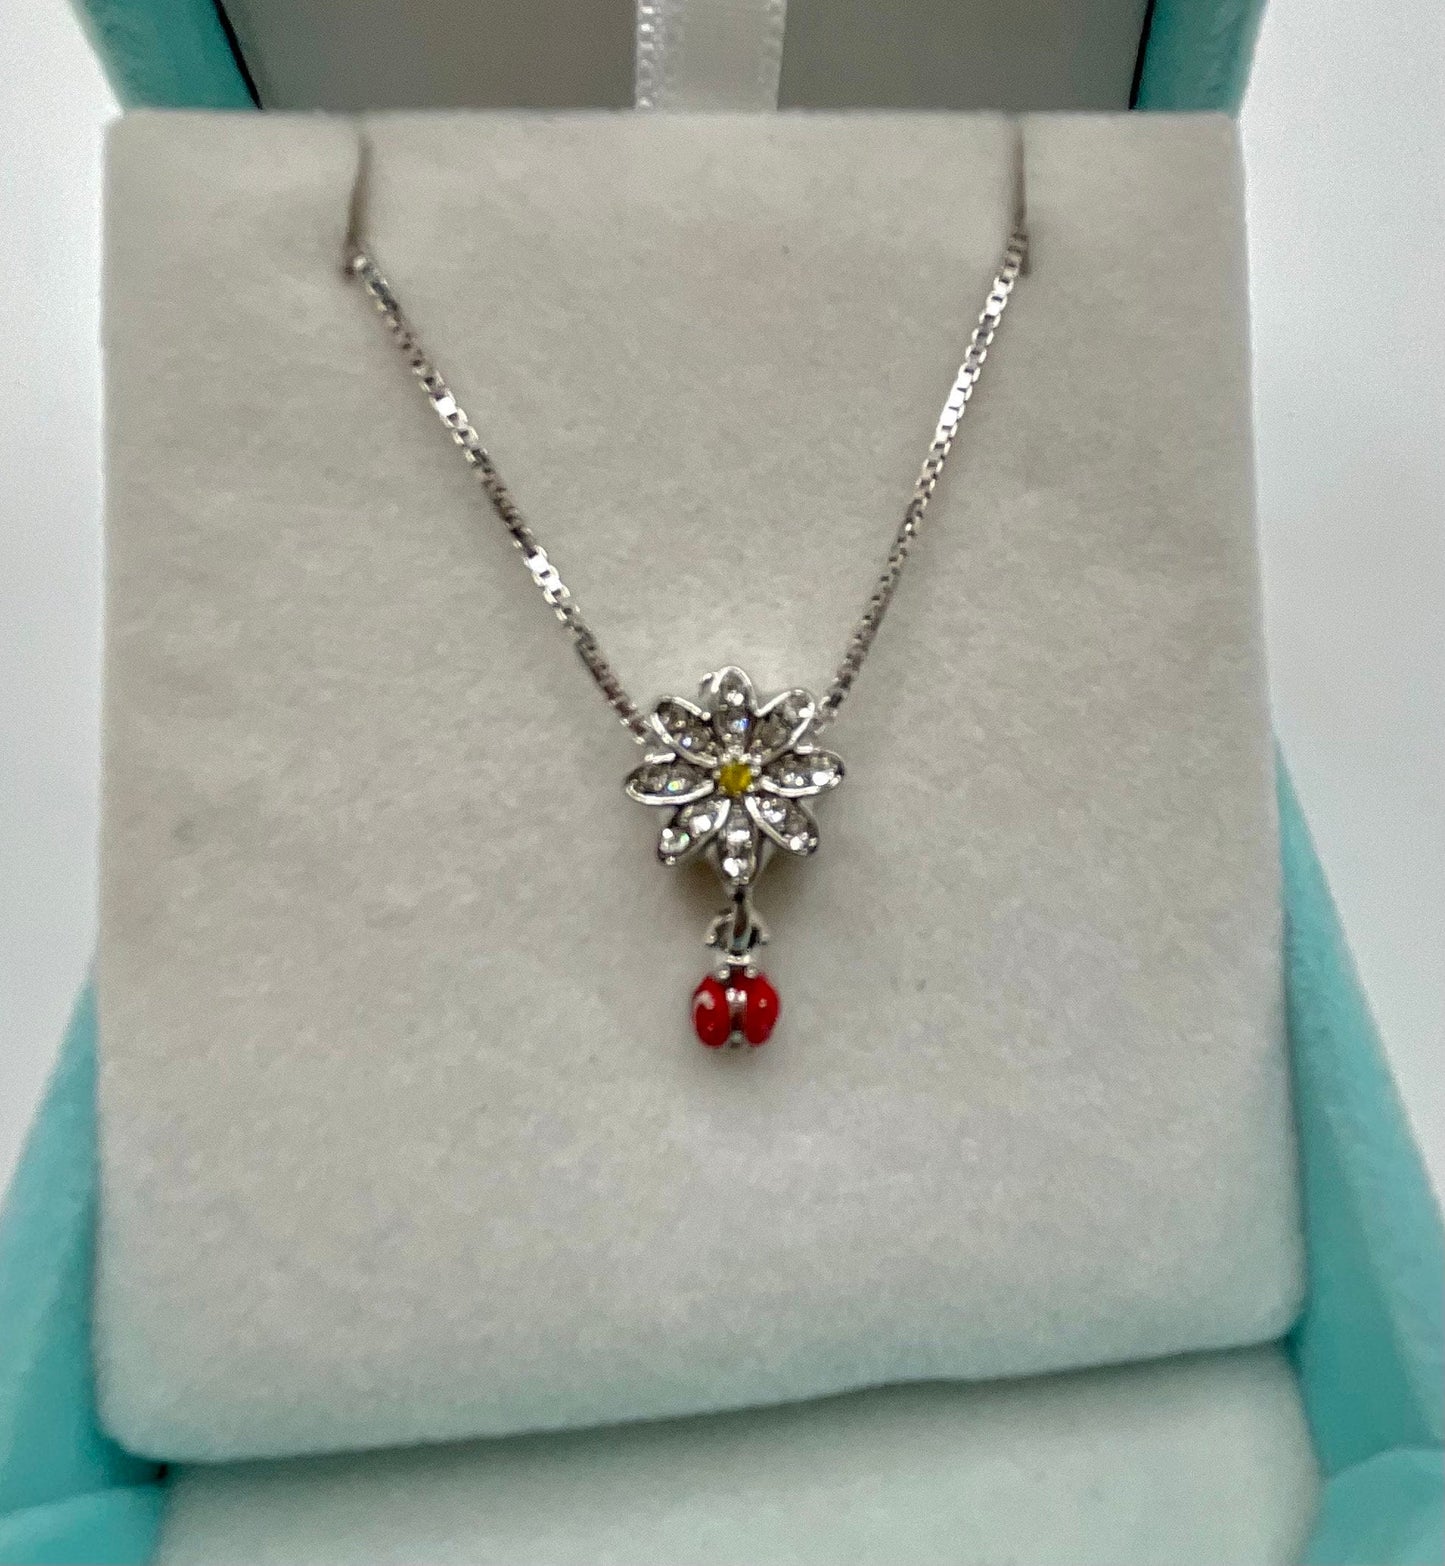 Sunflower Ladybug Rhinestone Necklace Pendant on an 18” Sterling Silver Box Chain